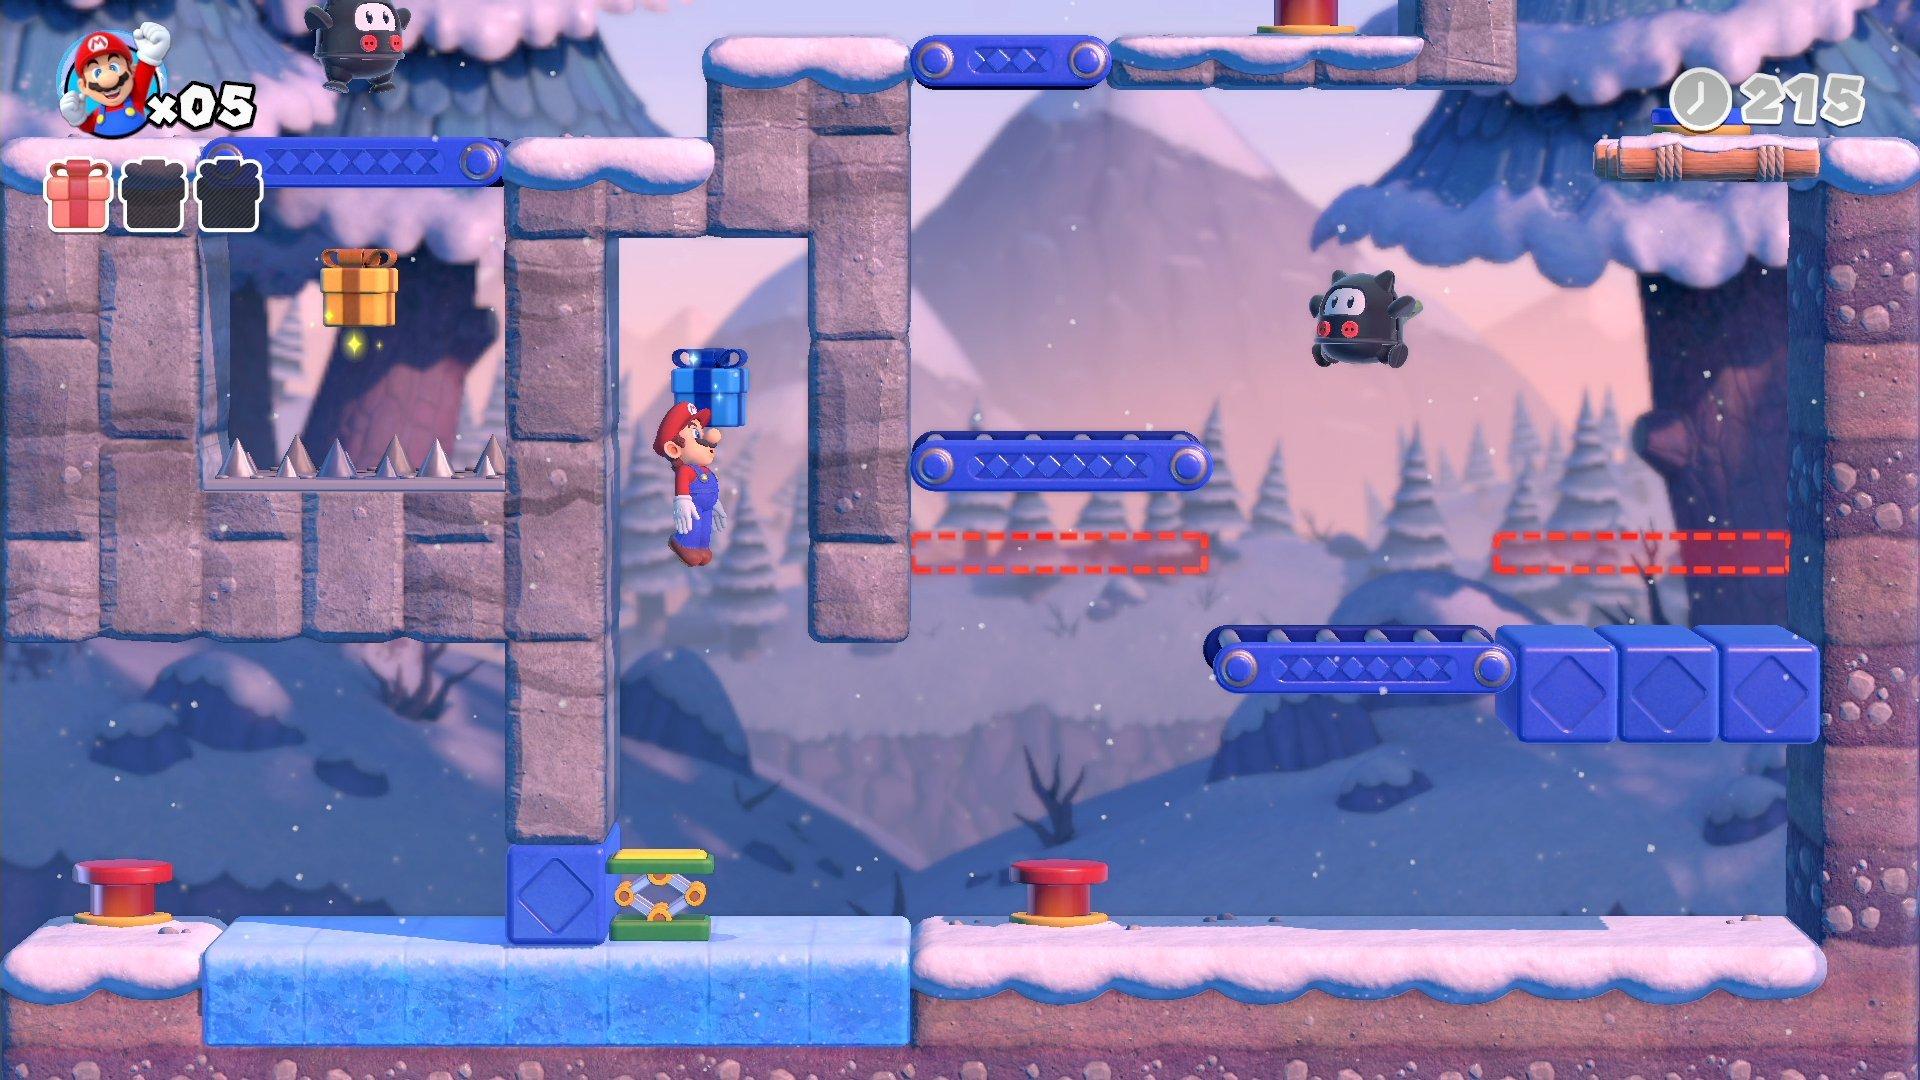 Mario Vs. Donkey Kong - Release Date, Characters, And Gameplay Details